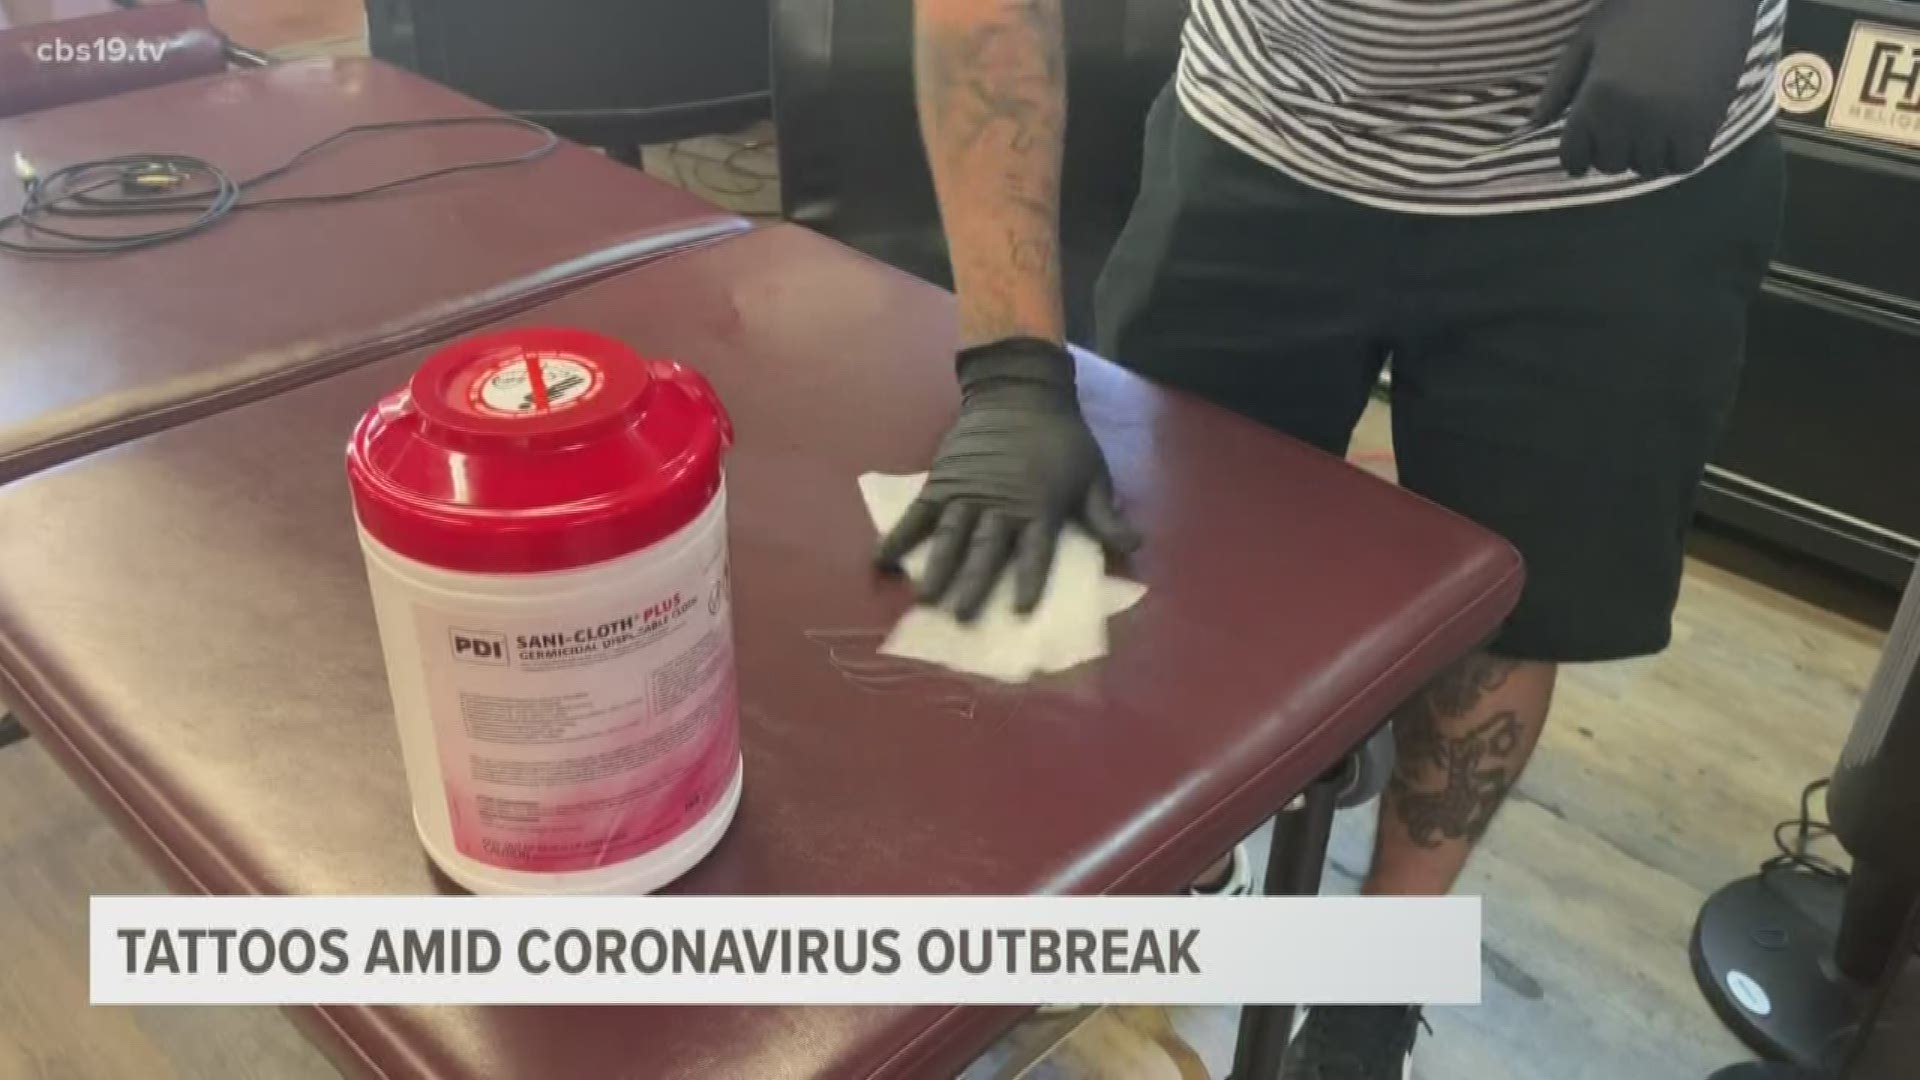 Friday the 13th is one of the busiest days for tattoo shops, but how is a local shop preparing with the COVID-19 outbreak?